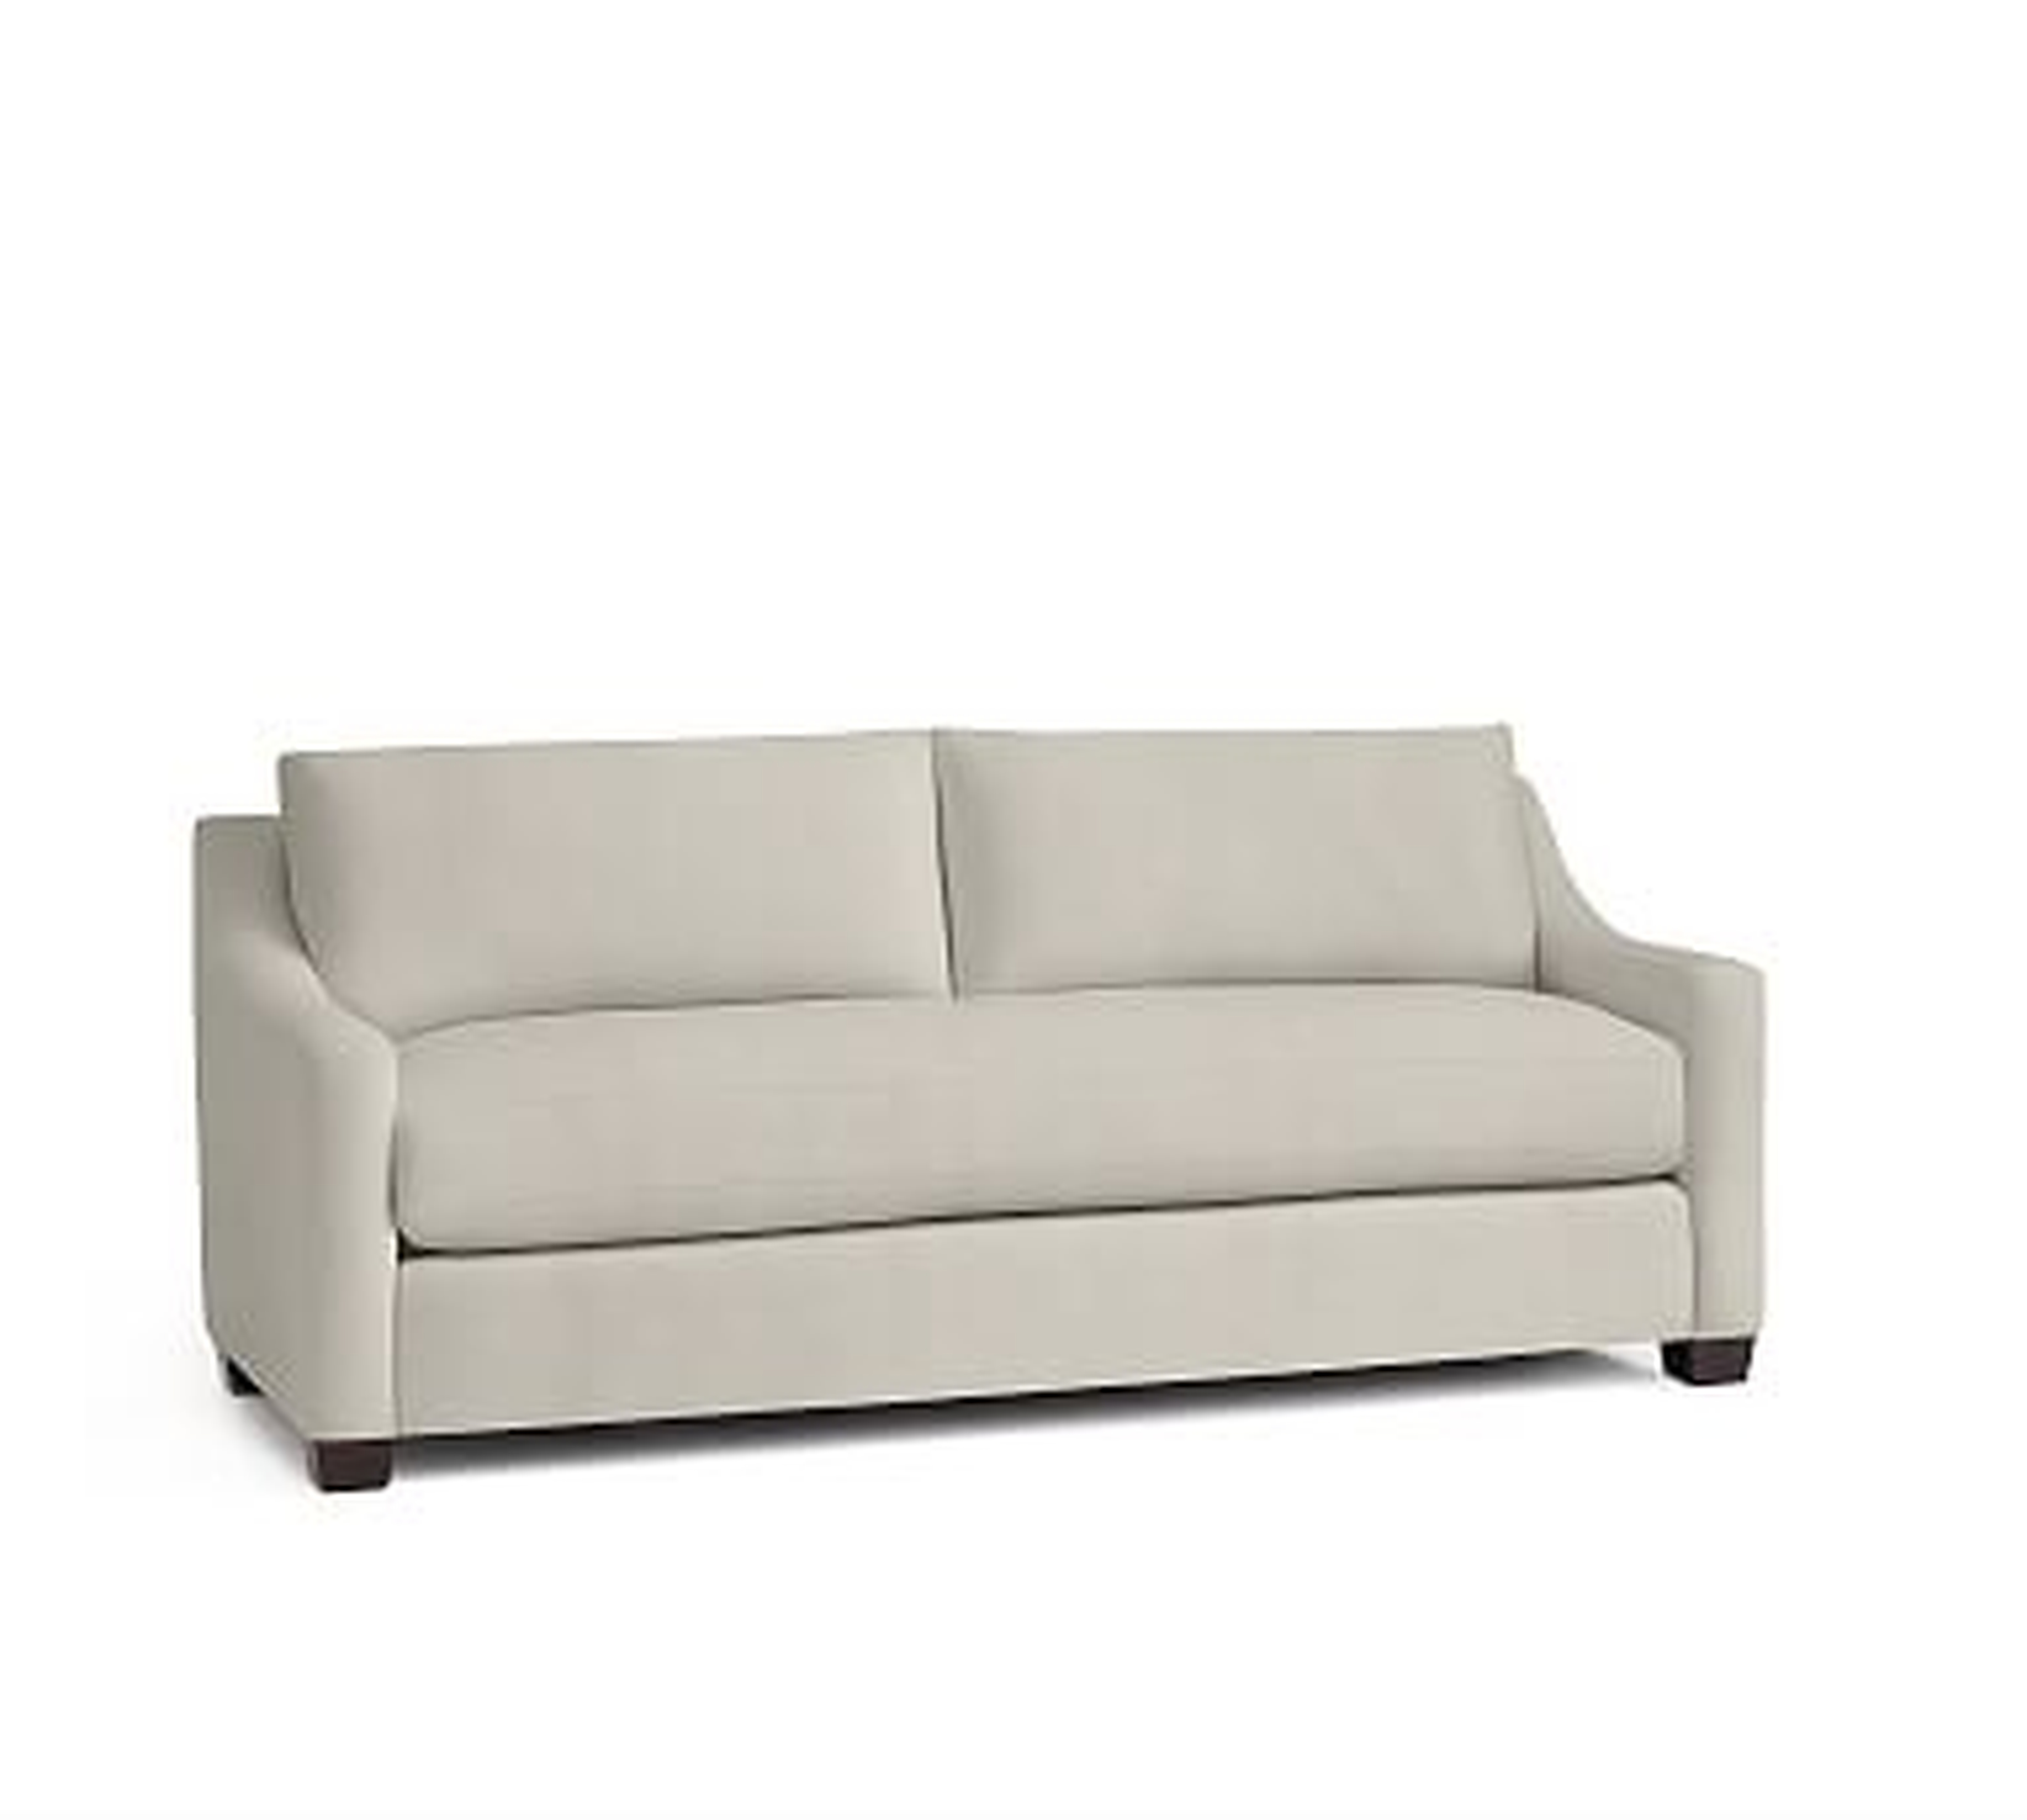 York Slope Arm Upholstered Loveseat 60" with Bench Cushion, Down Blend Wrapped Cushions, Performance Everydaysuede(TM) Stone - Pottery Barn